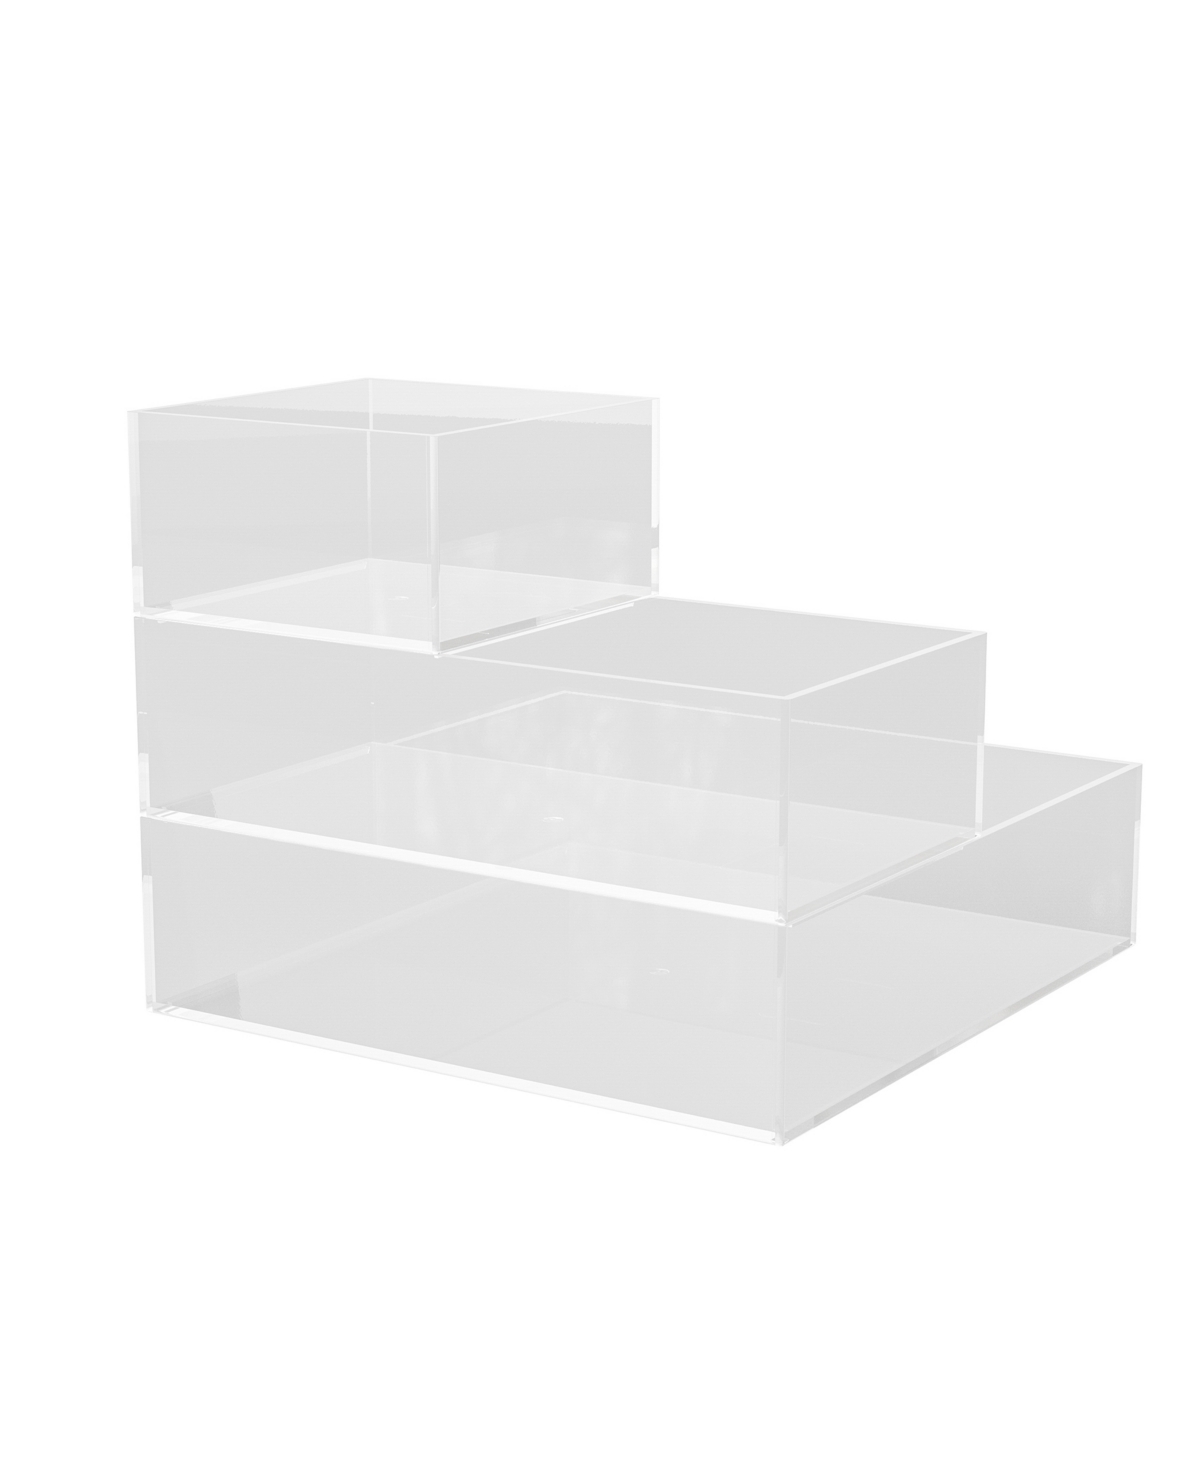 Martha Stewart Brody Plastic Storage Organizer Bins With Engineered Wood Lids For Home Office Or Kitchen, 3 Pack Sm In Clear,white